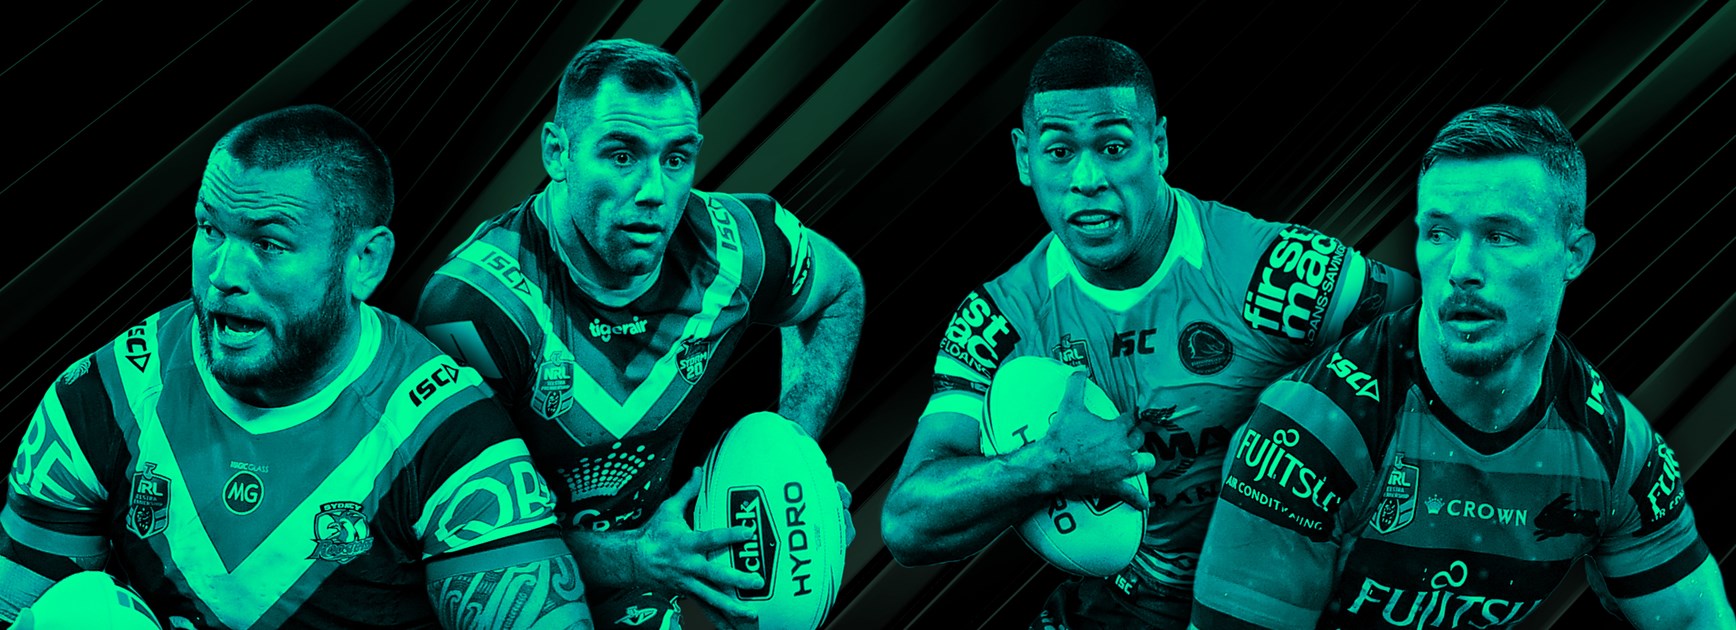 NRL Tipping is back for 2019